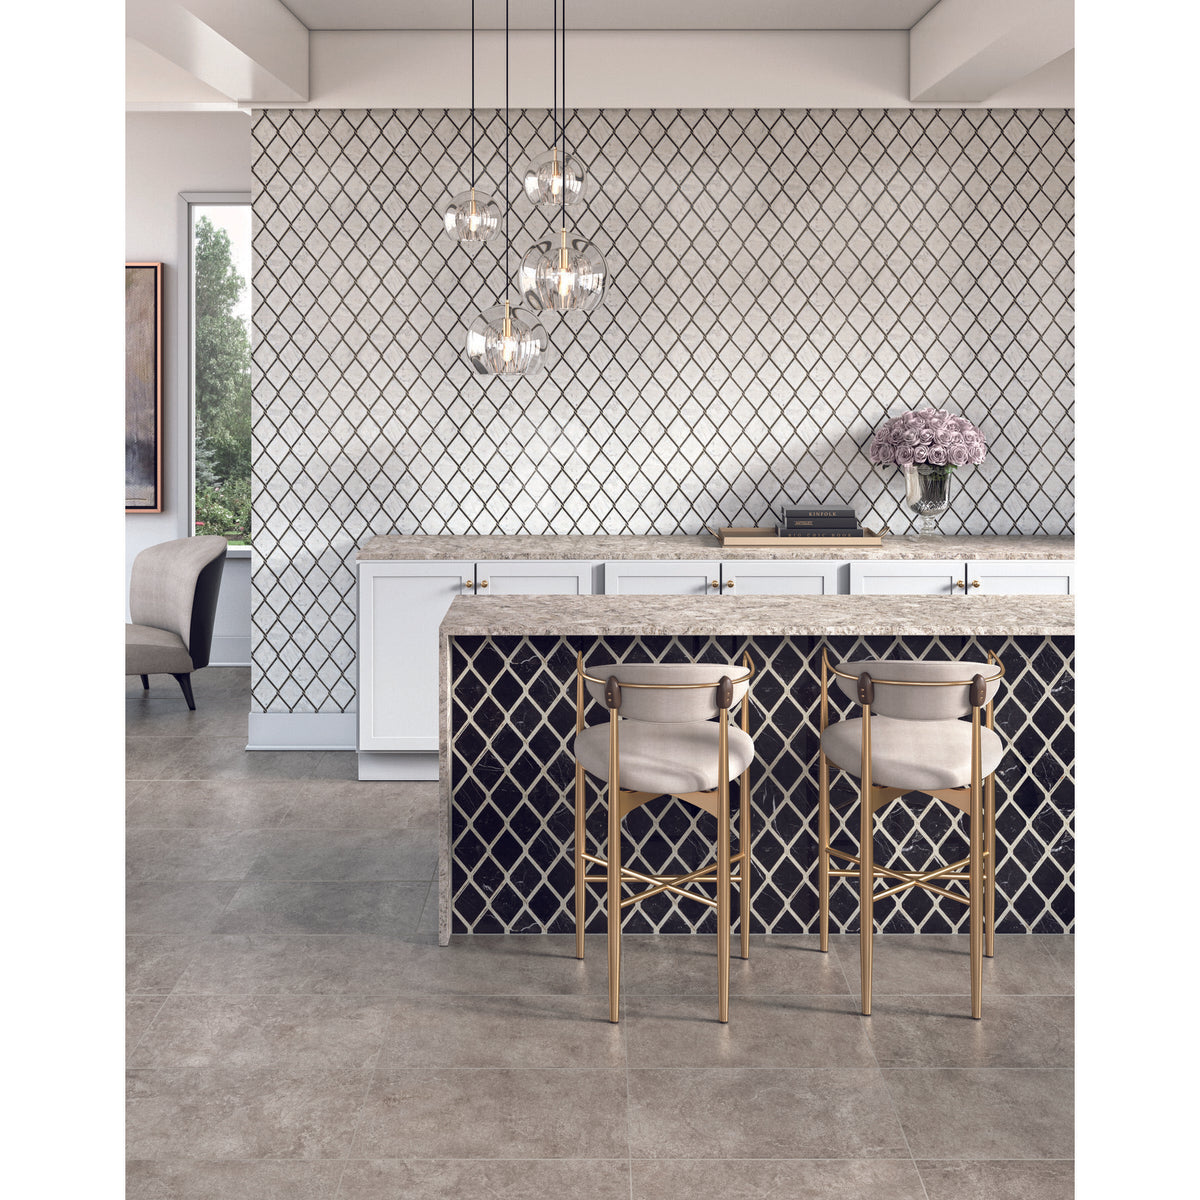 Daltile - Lavaliere Chain Link Mosaic - LV22 Nero Marquina Antique Mirror Installed